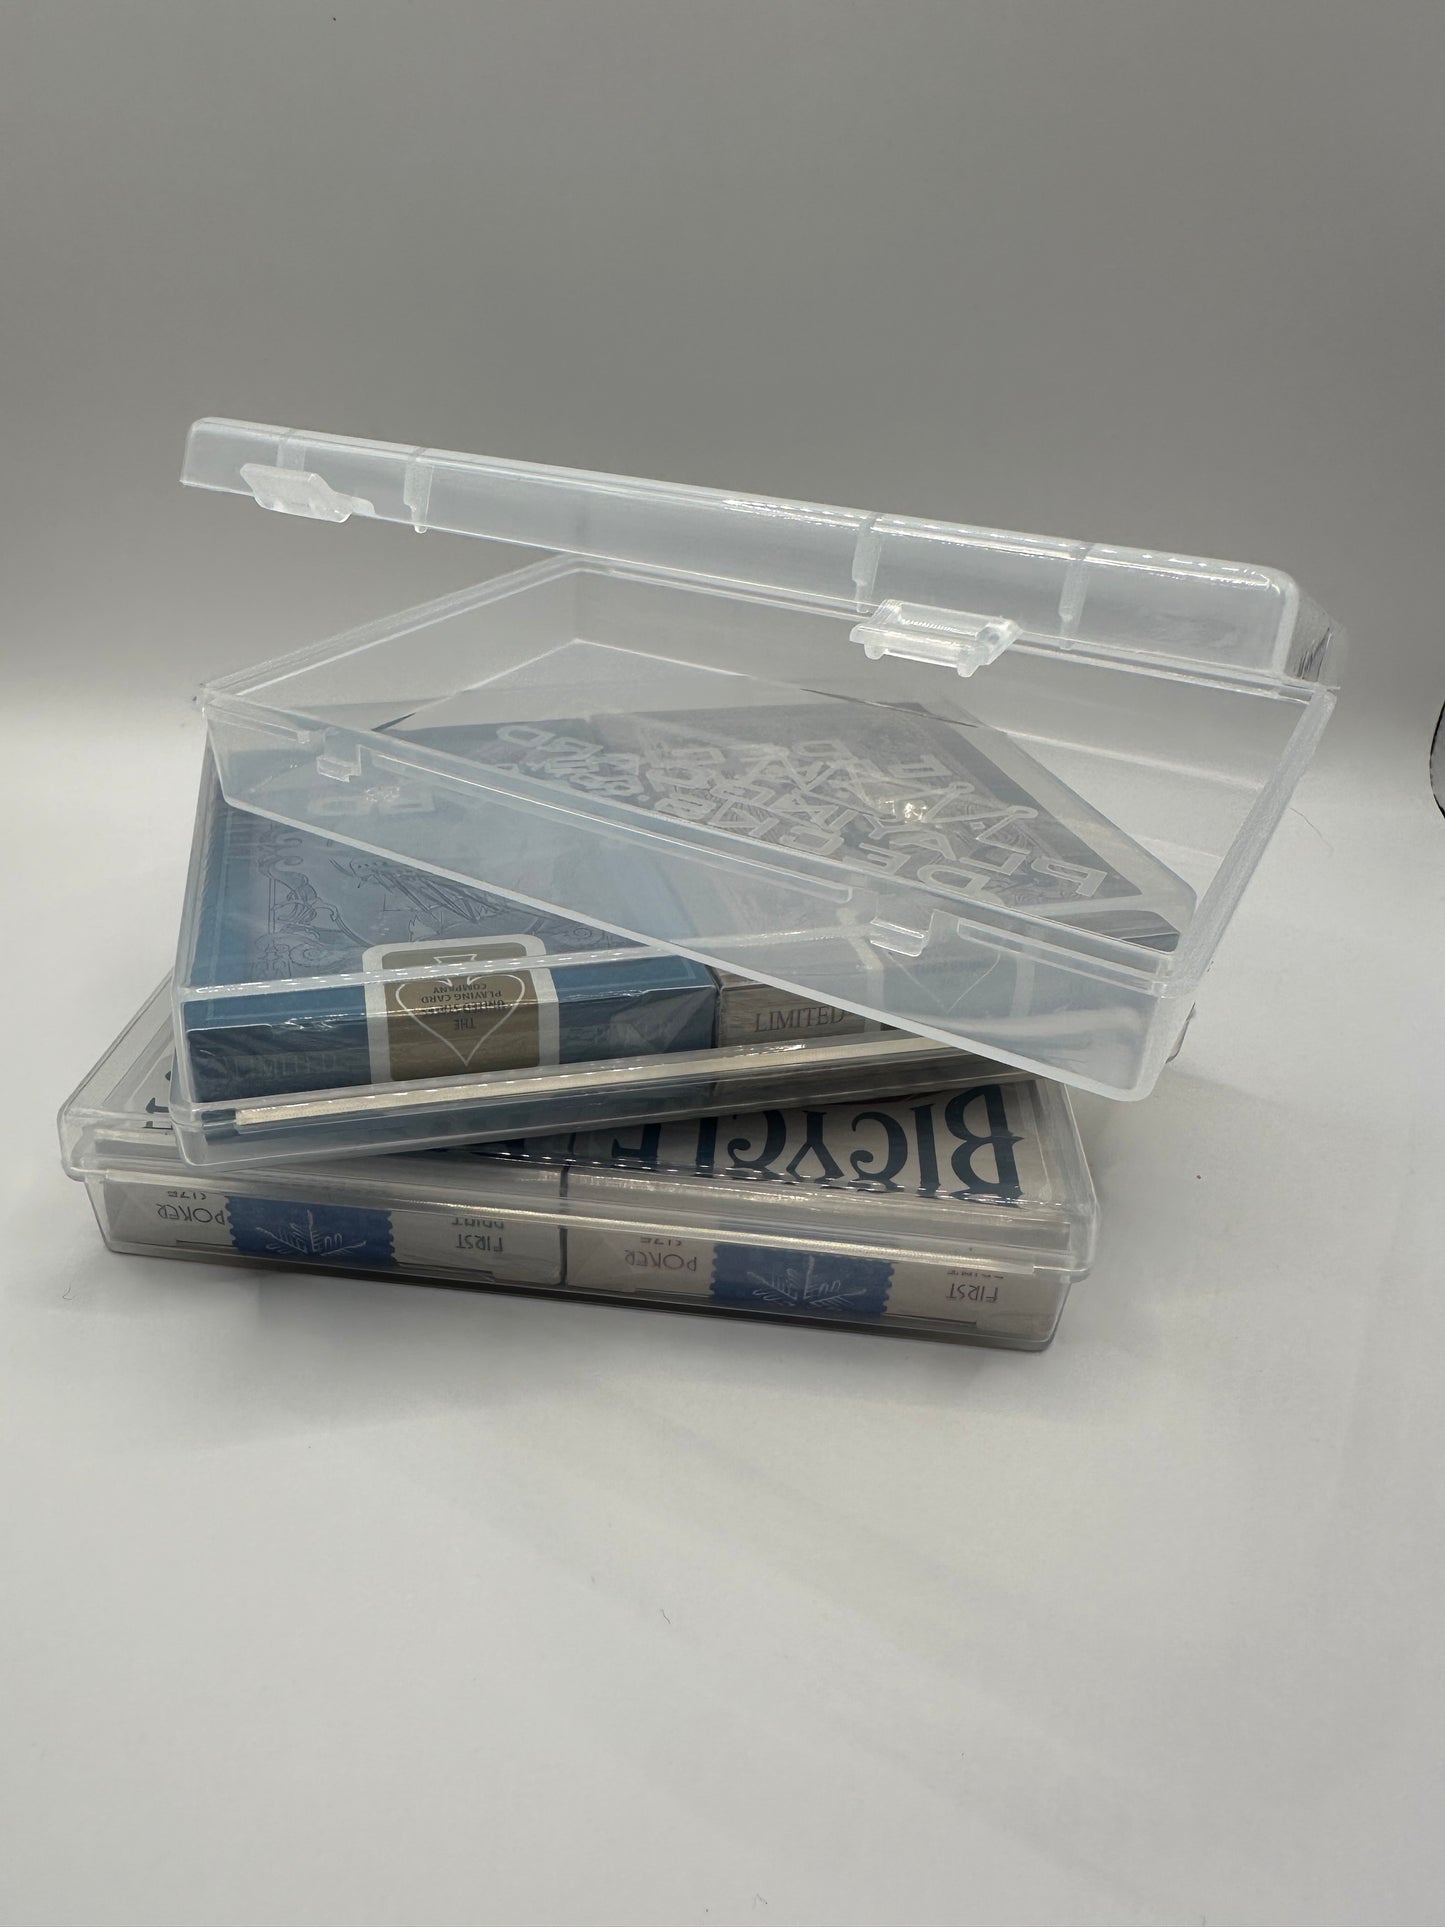 PCD Clear Plastic 2 Deck Set Box – Finally an affordable solution for your favorite sets!